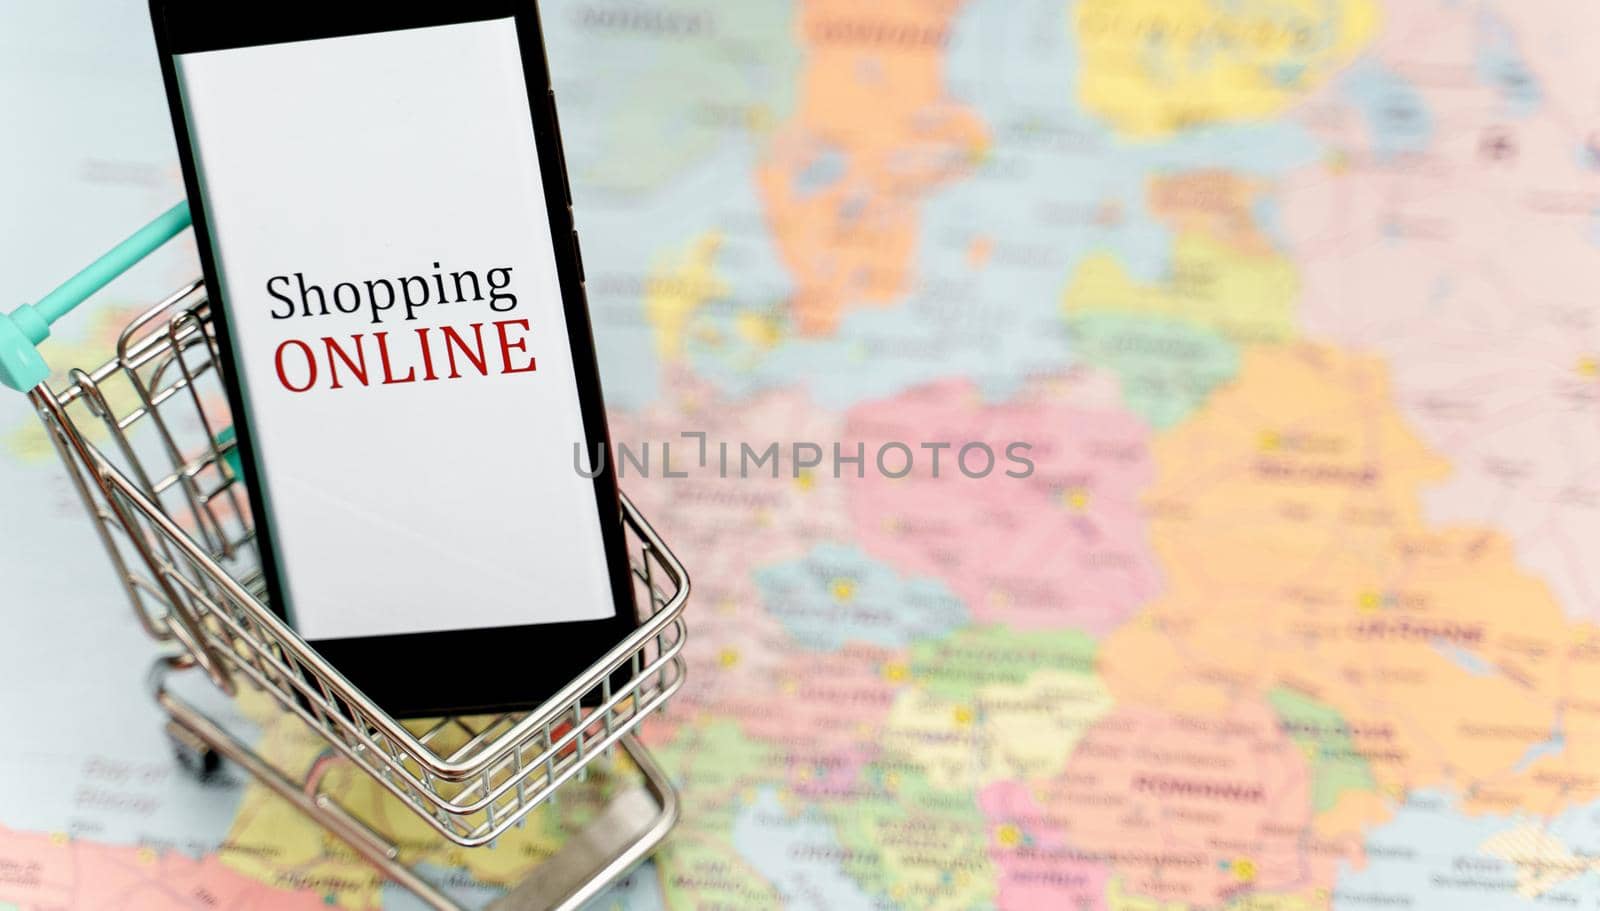 Mobile phone in shopping trolley. Online shopping concept. by dmitrimaruta